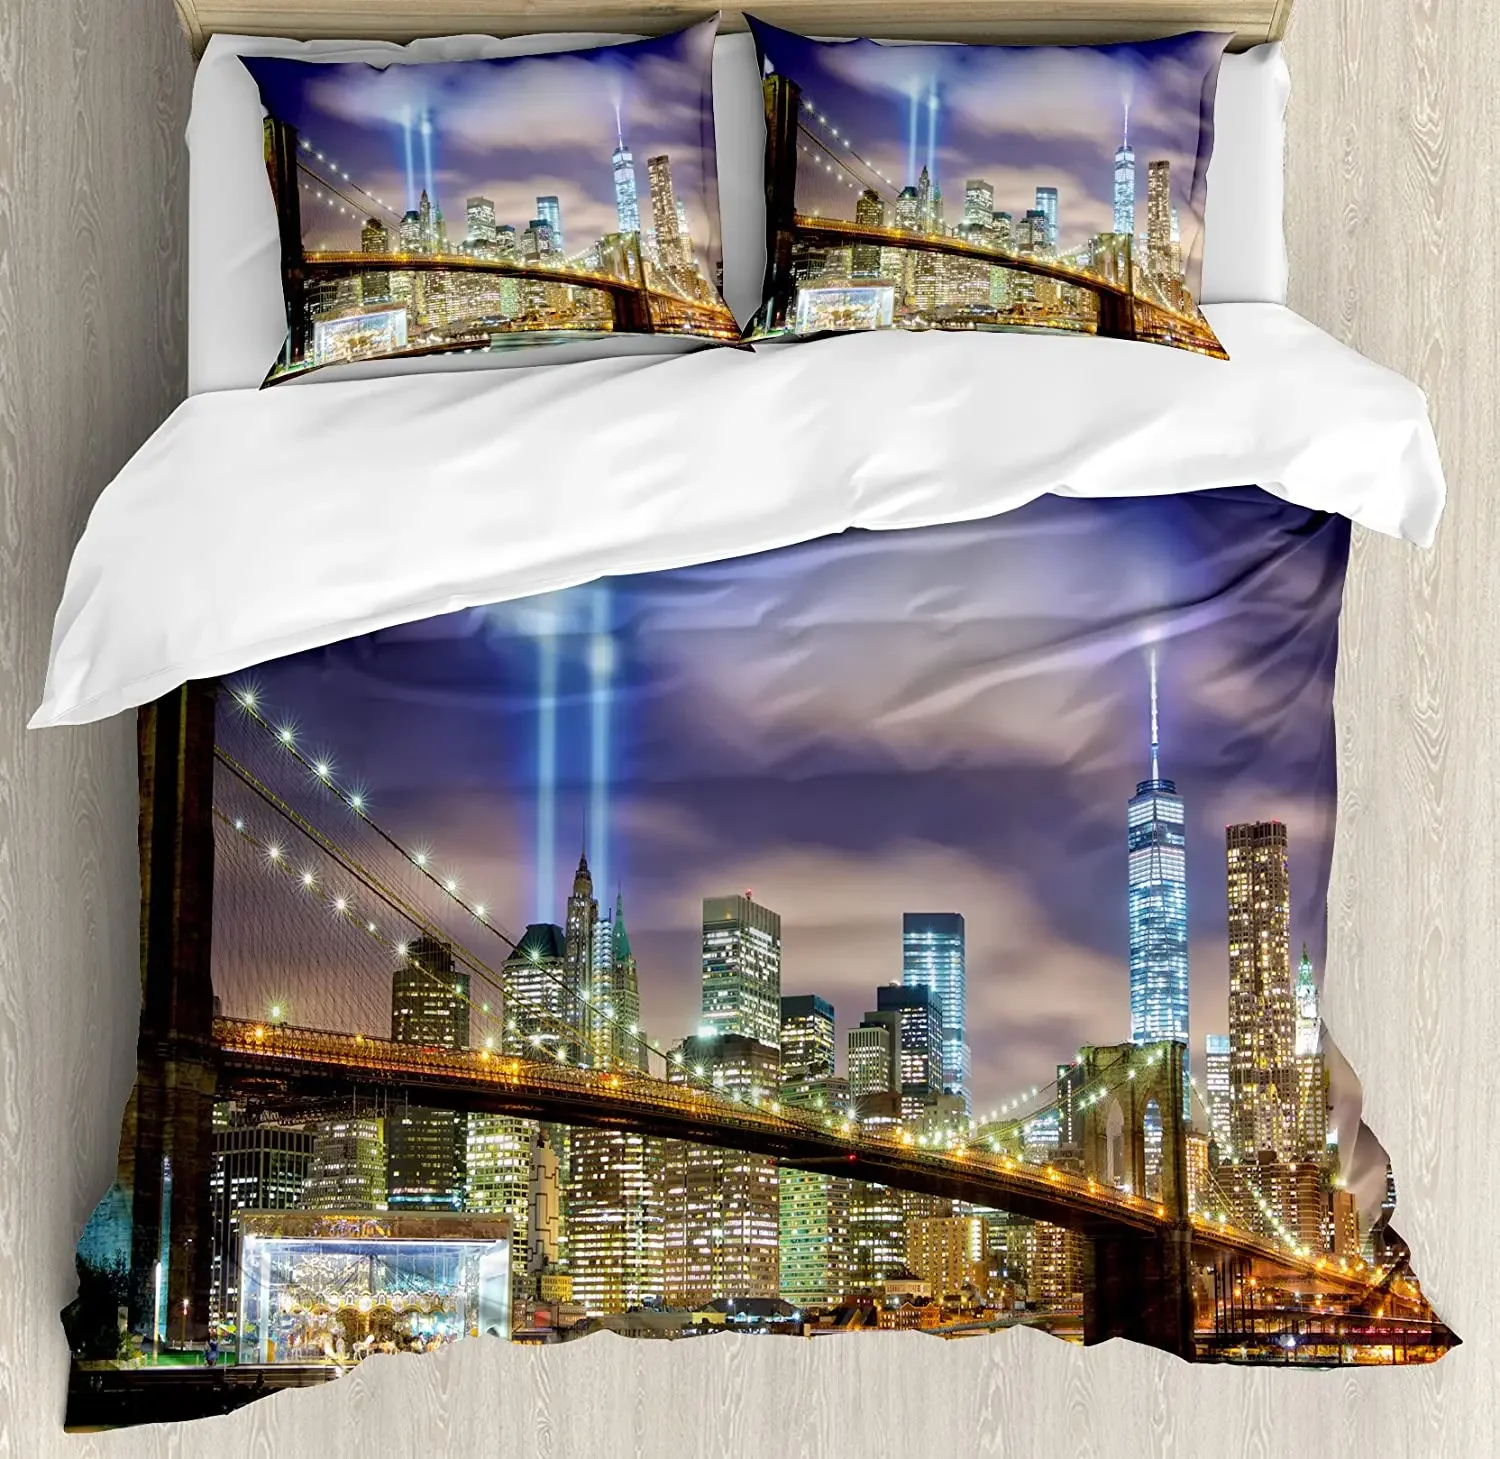 

Landscape Bedding Set For Bedroom Bed Home Manhattan Skyline with Brooklyn Bridge and Towe Duvet Cover Quilt Cover Pillowcase